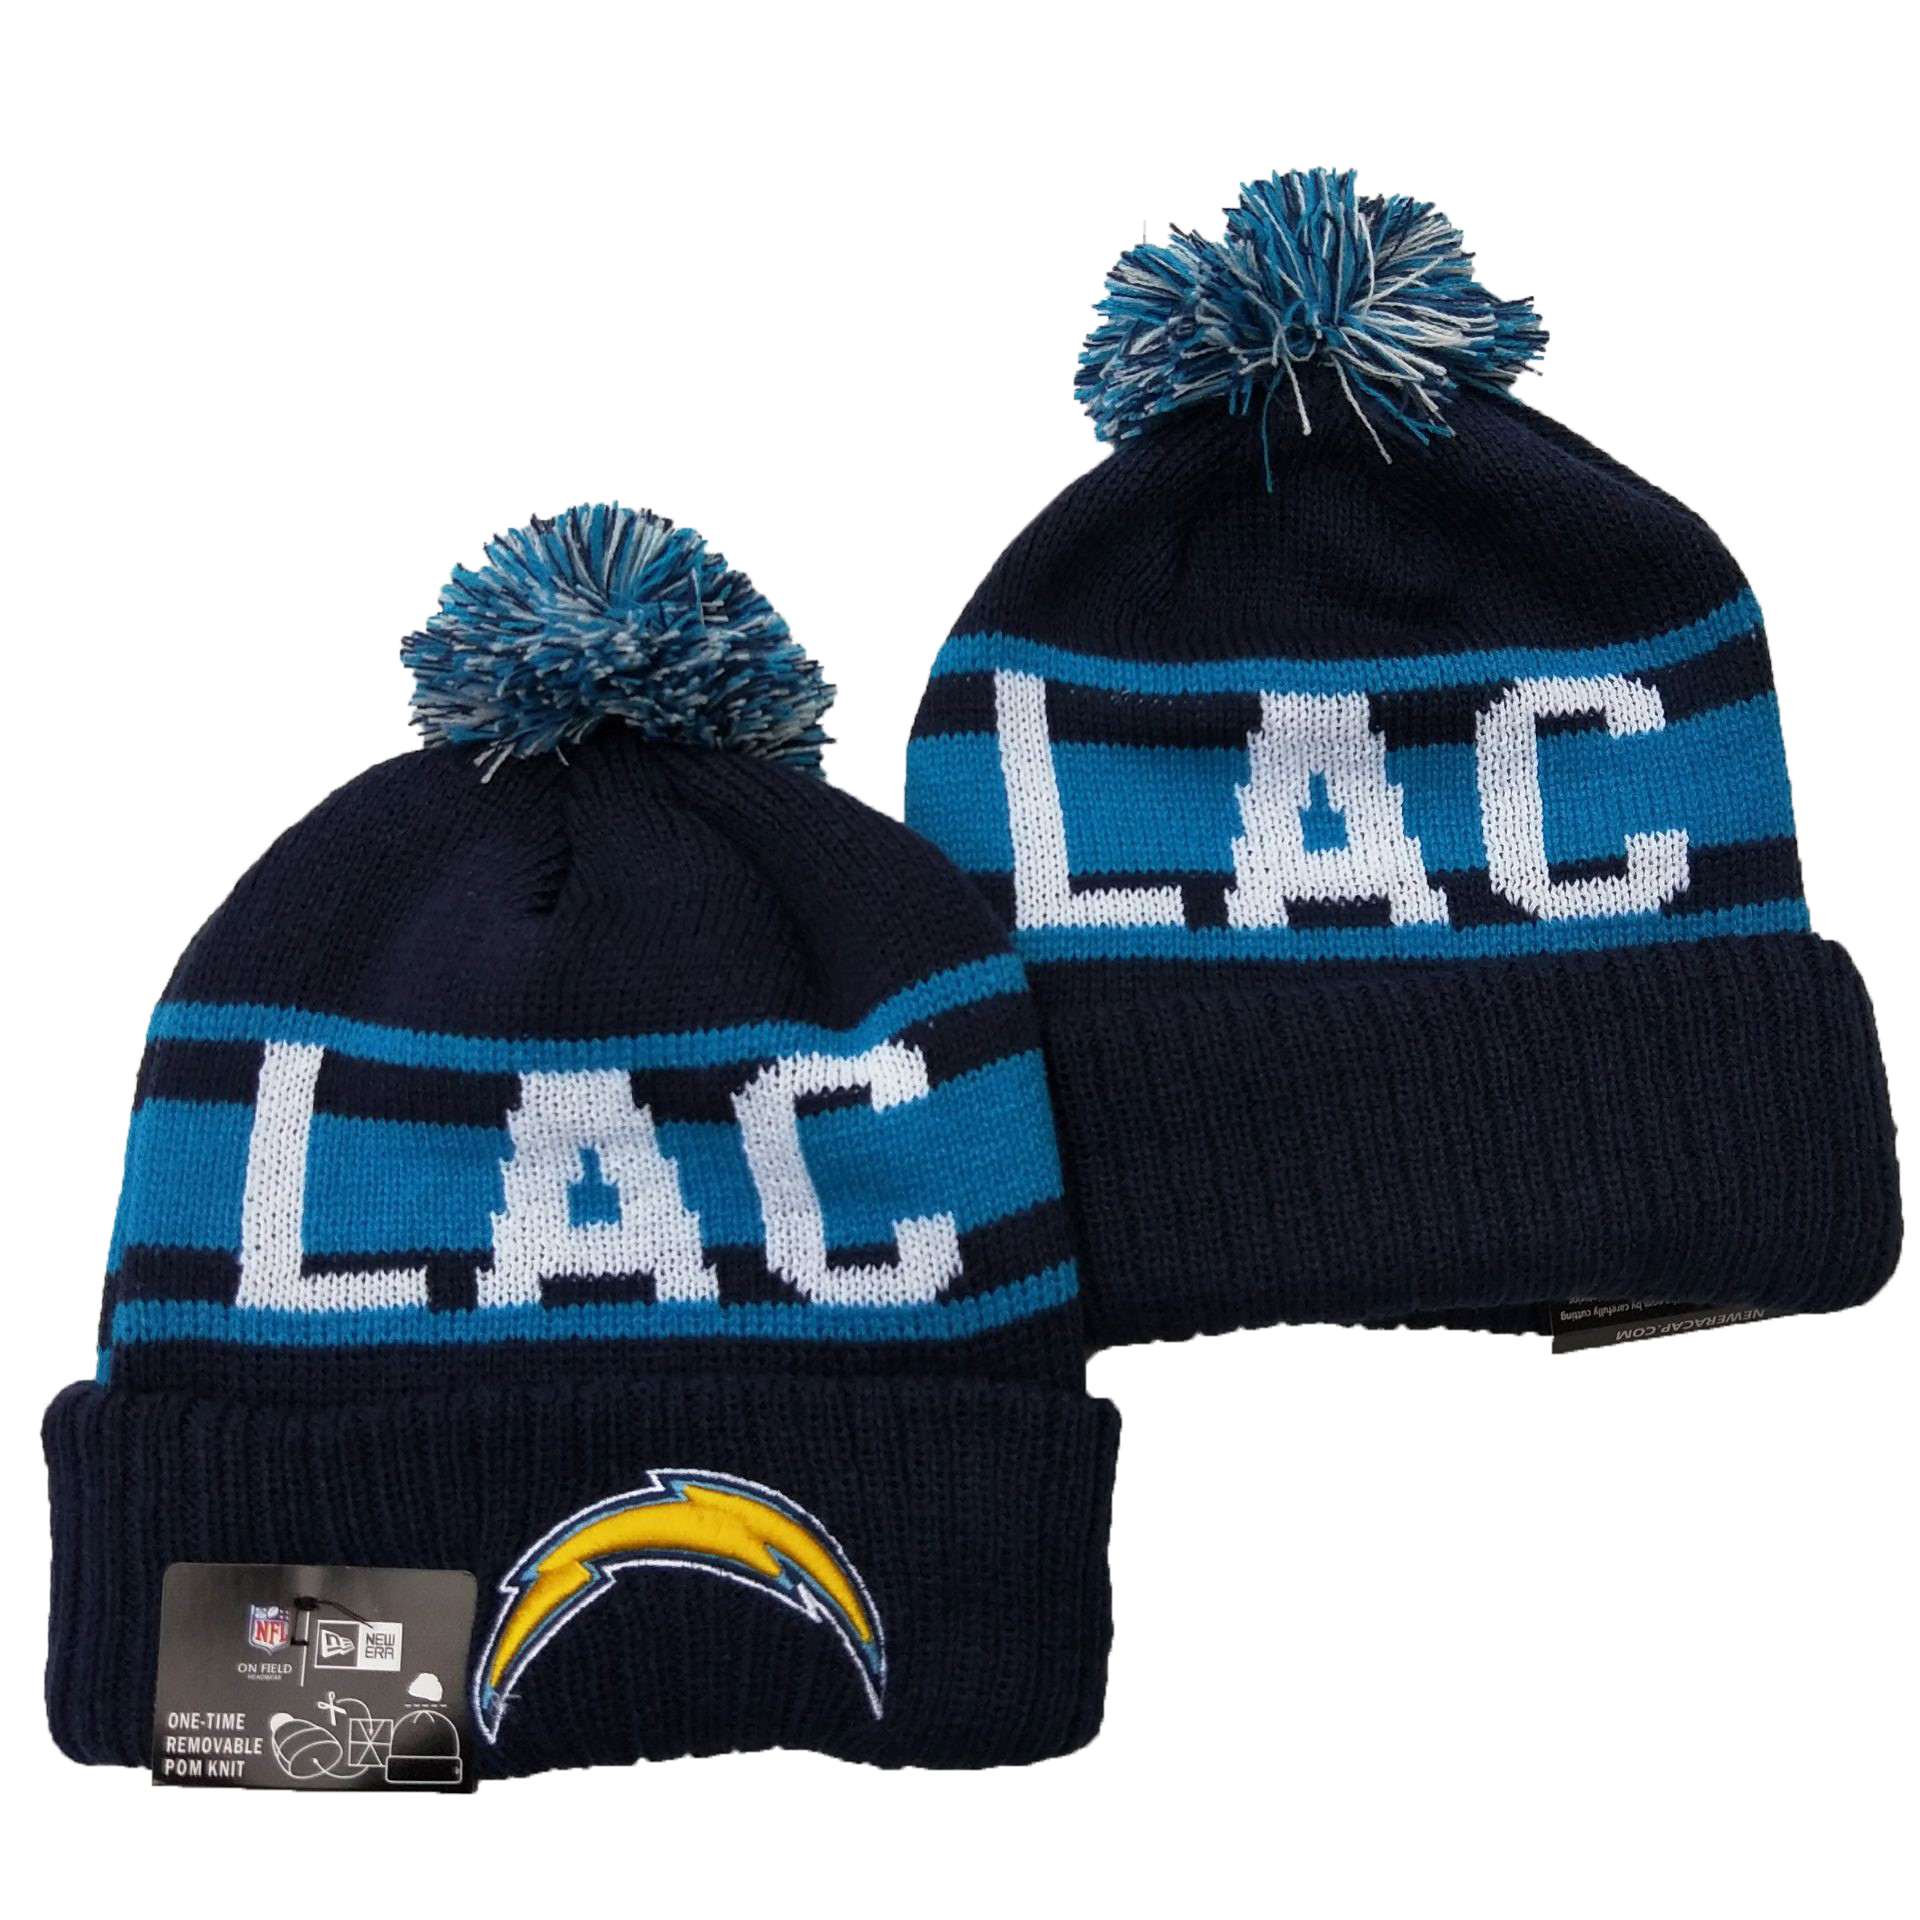 Los Angeles Chargers Knit Hats 034